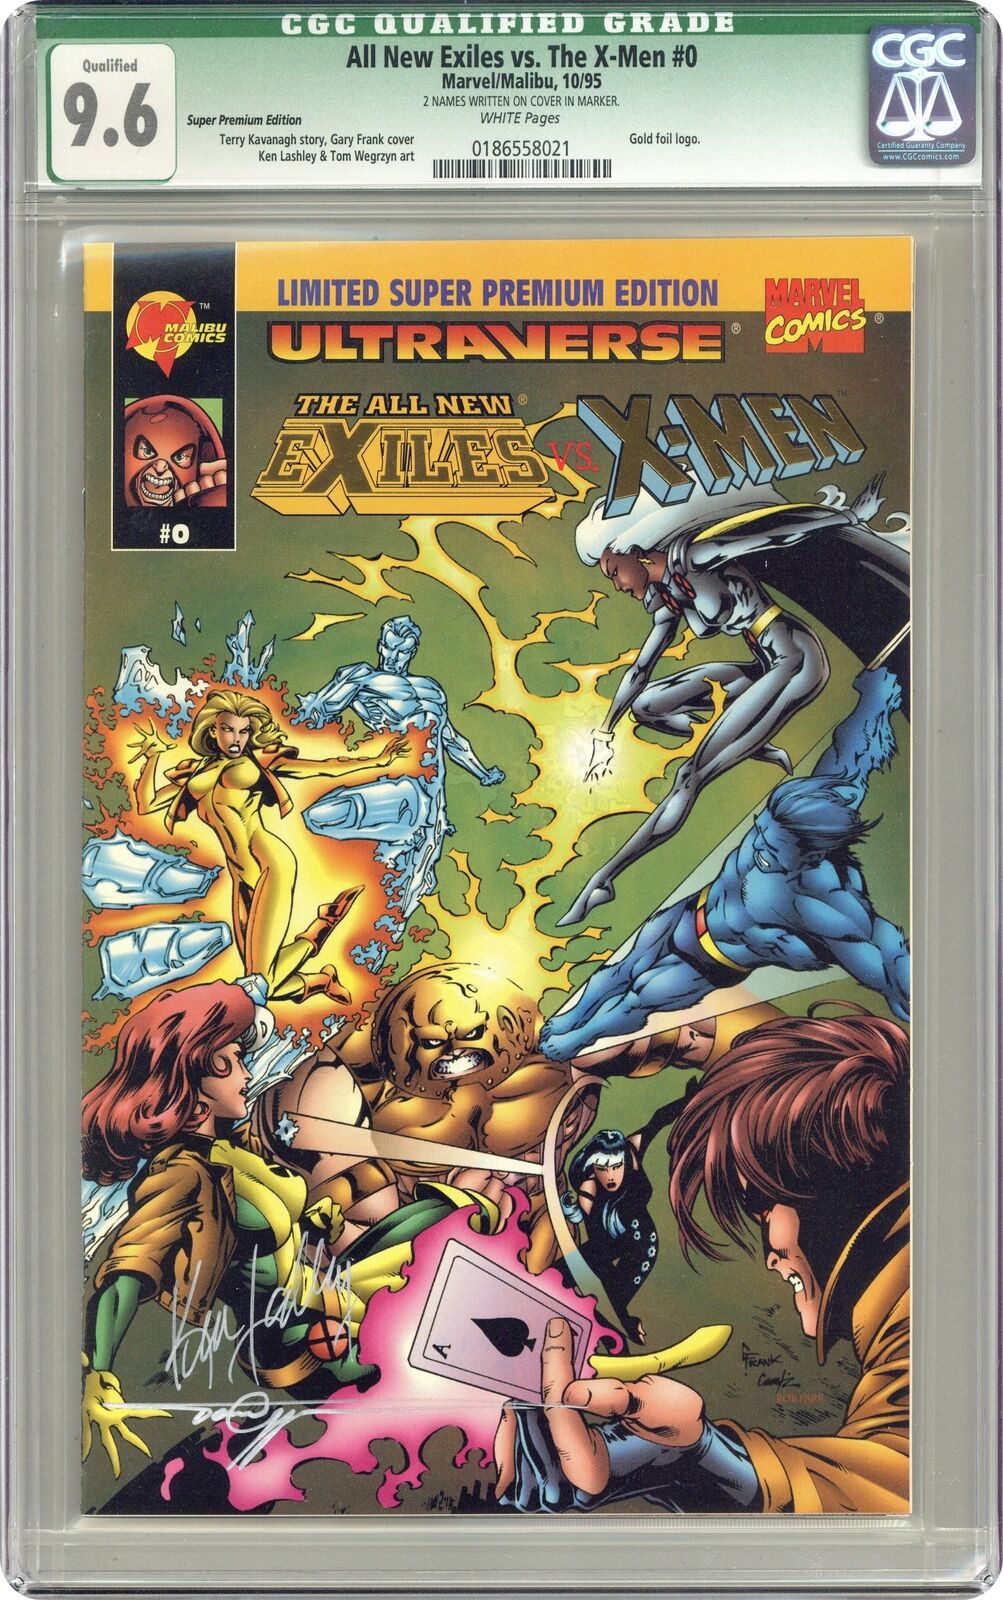 All New Exiles vs. X-Men #0GOLDSIGNED CGC 9.6 QUALIFIED 1995 0186558021